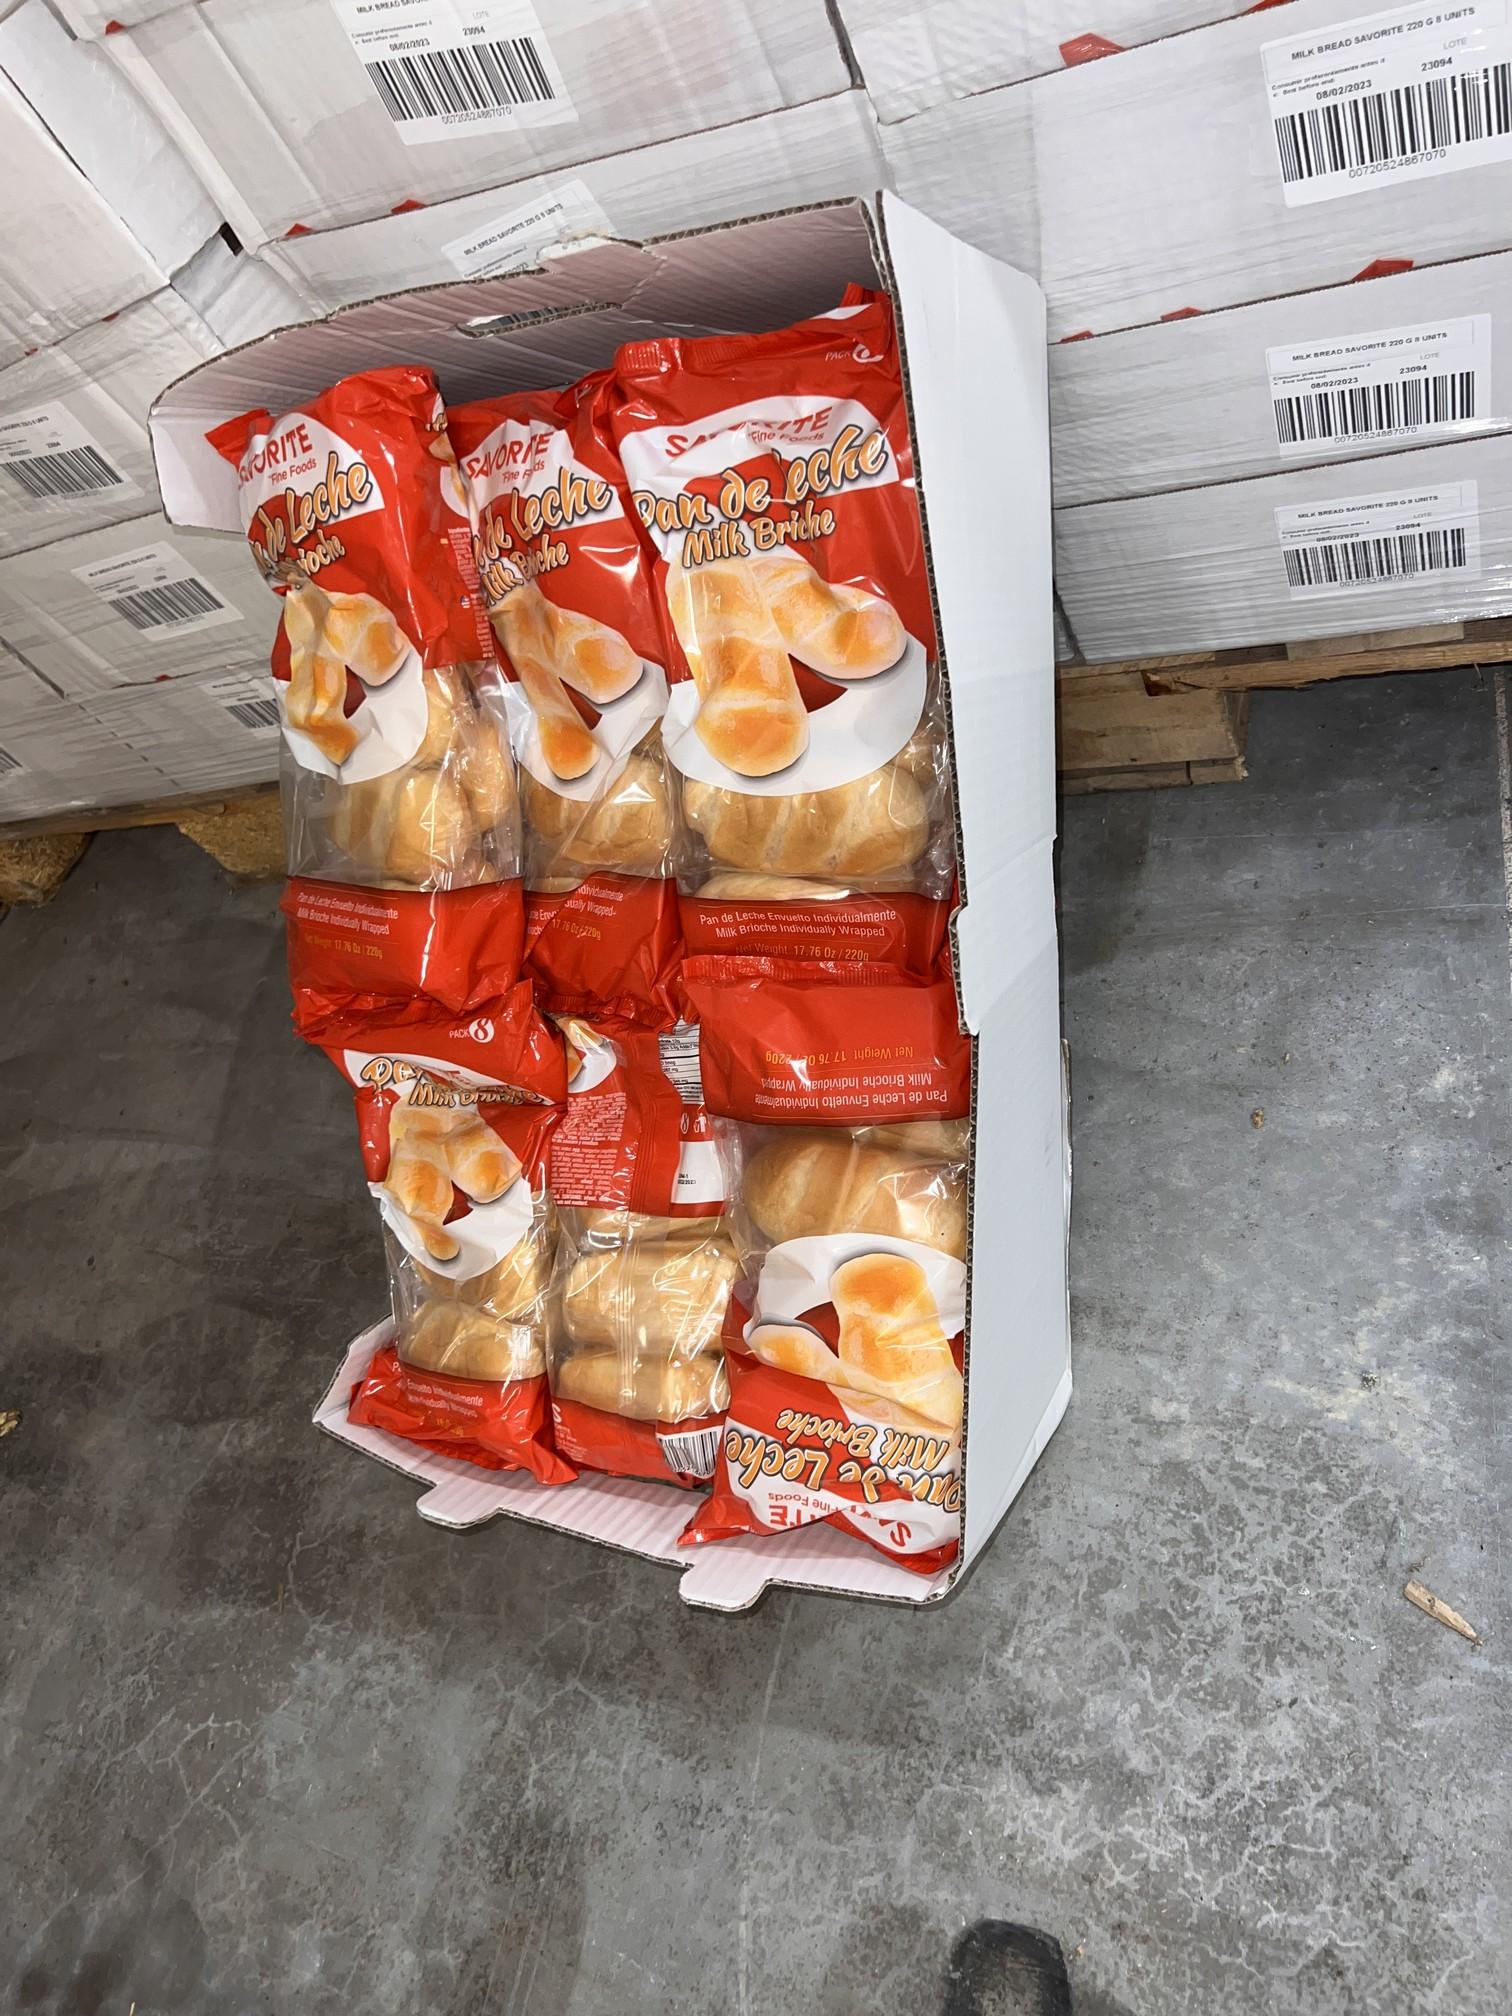 Quantity of  21 Pallets of EXPIRED  (68 Boxes) Per Pallet of Milk Bread Rolls